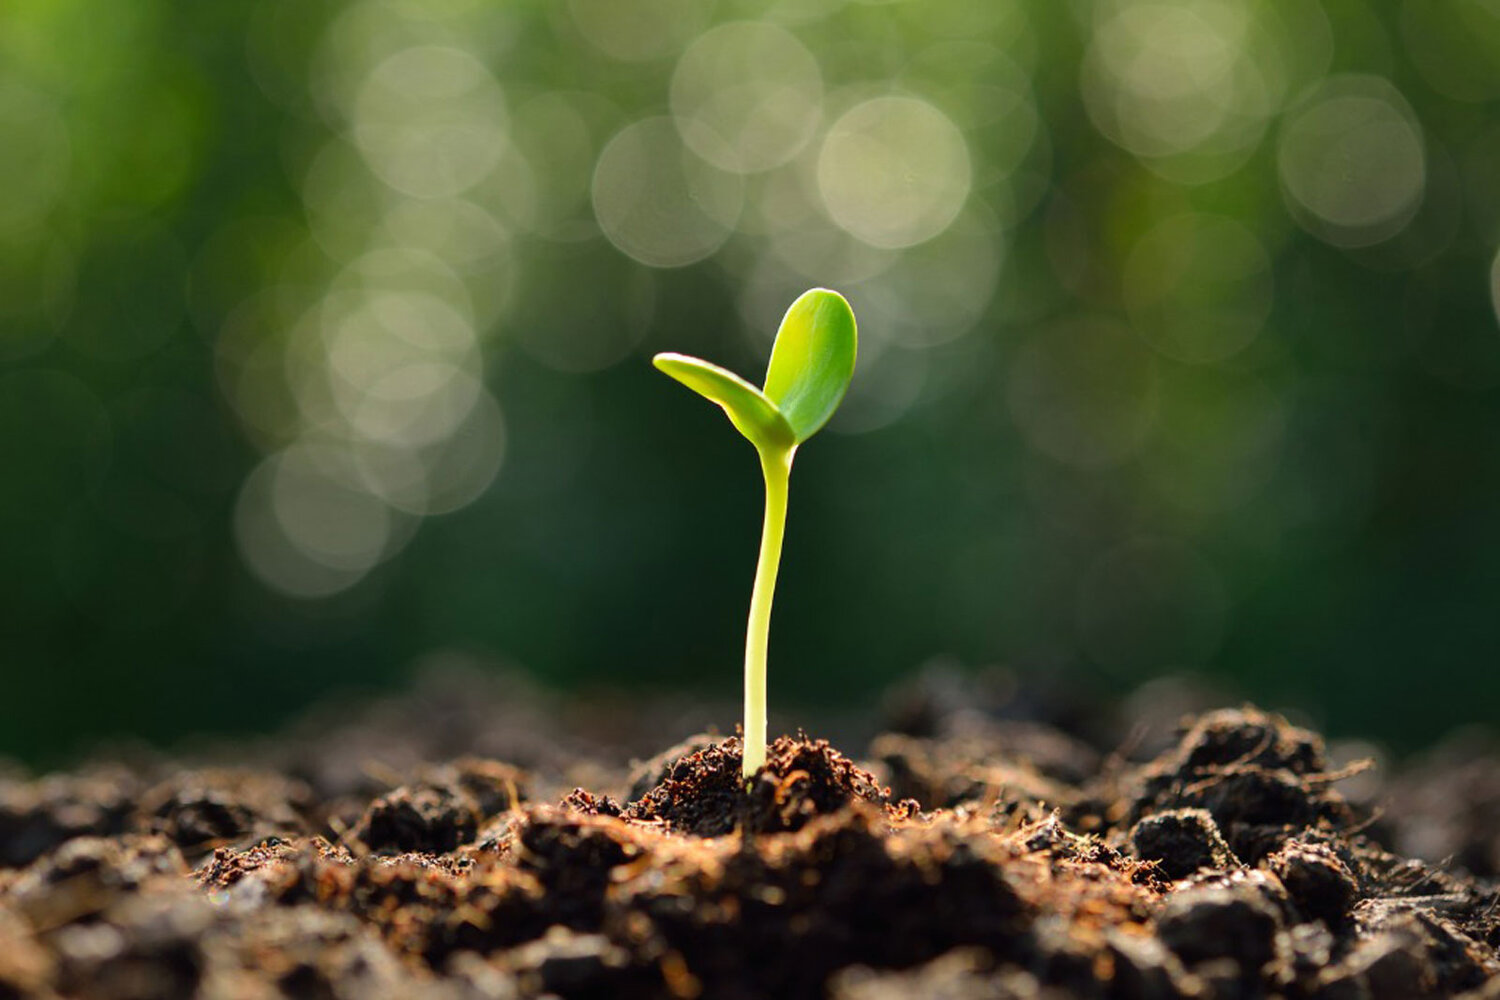 How To Plant Germinated Seeds In Soil